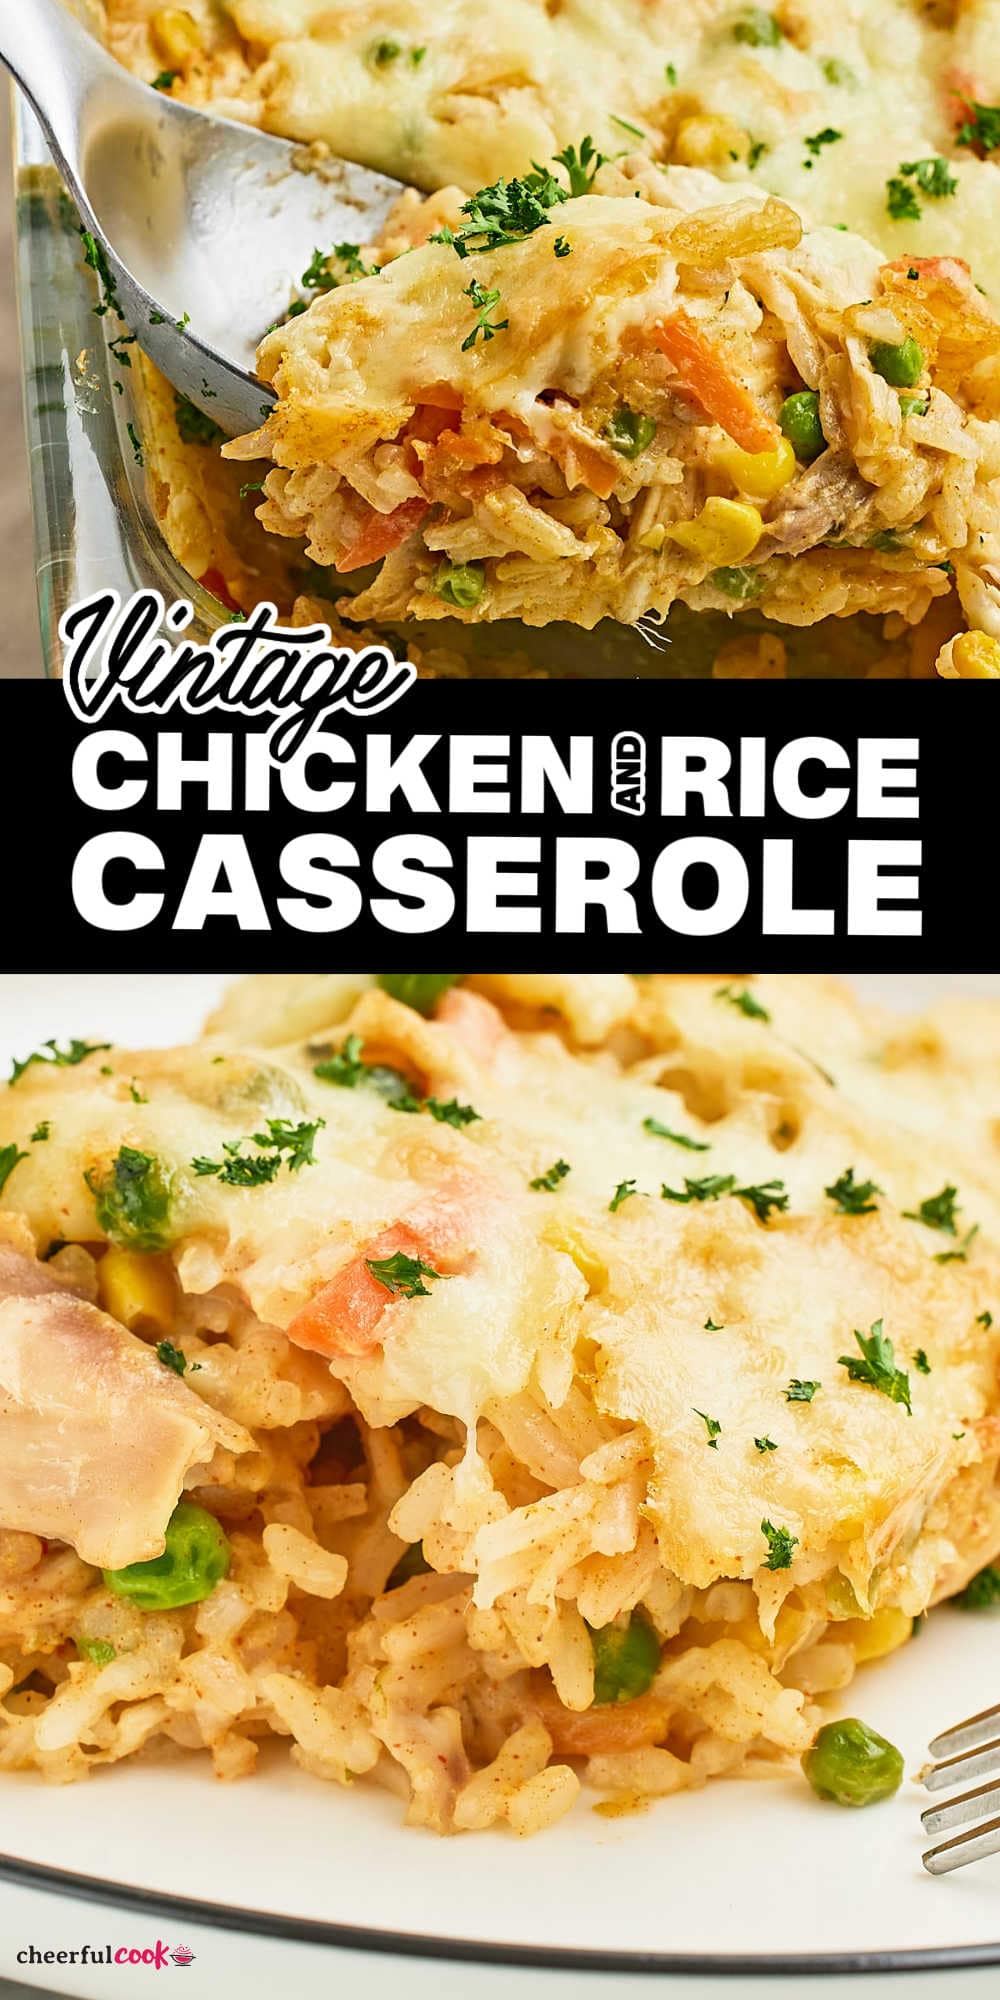 Looking for a quick and easy meal that's perfect for busy nights? Try our comforting chicken and rice casserole! Packed with rotisserie chicken, rice, mixed veggies, and a creamy sauce, it's a satisfying one-dish meal the whole family will love. Plus, it's customizable, so you can make it your own. #cheerfulcook #chickenricecasserole #casserole #chickencasserole #comfortfood #rotisseriechicken via @cheerfulcook